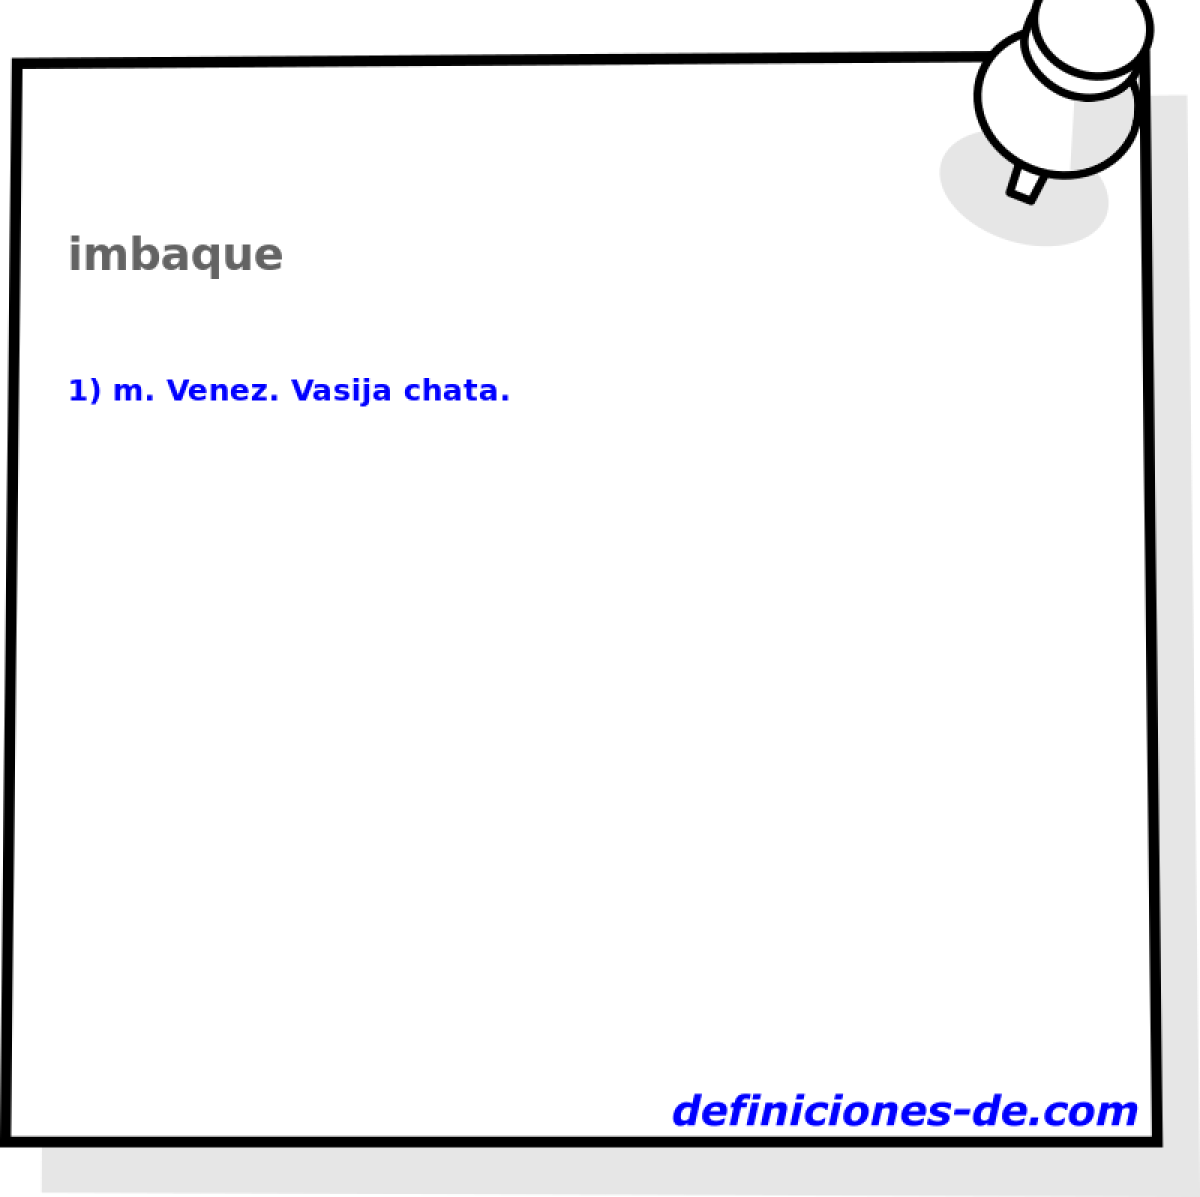 imbaque 